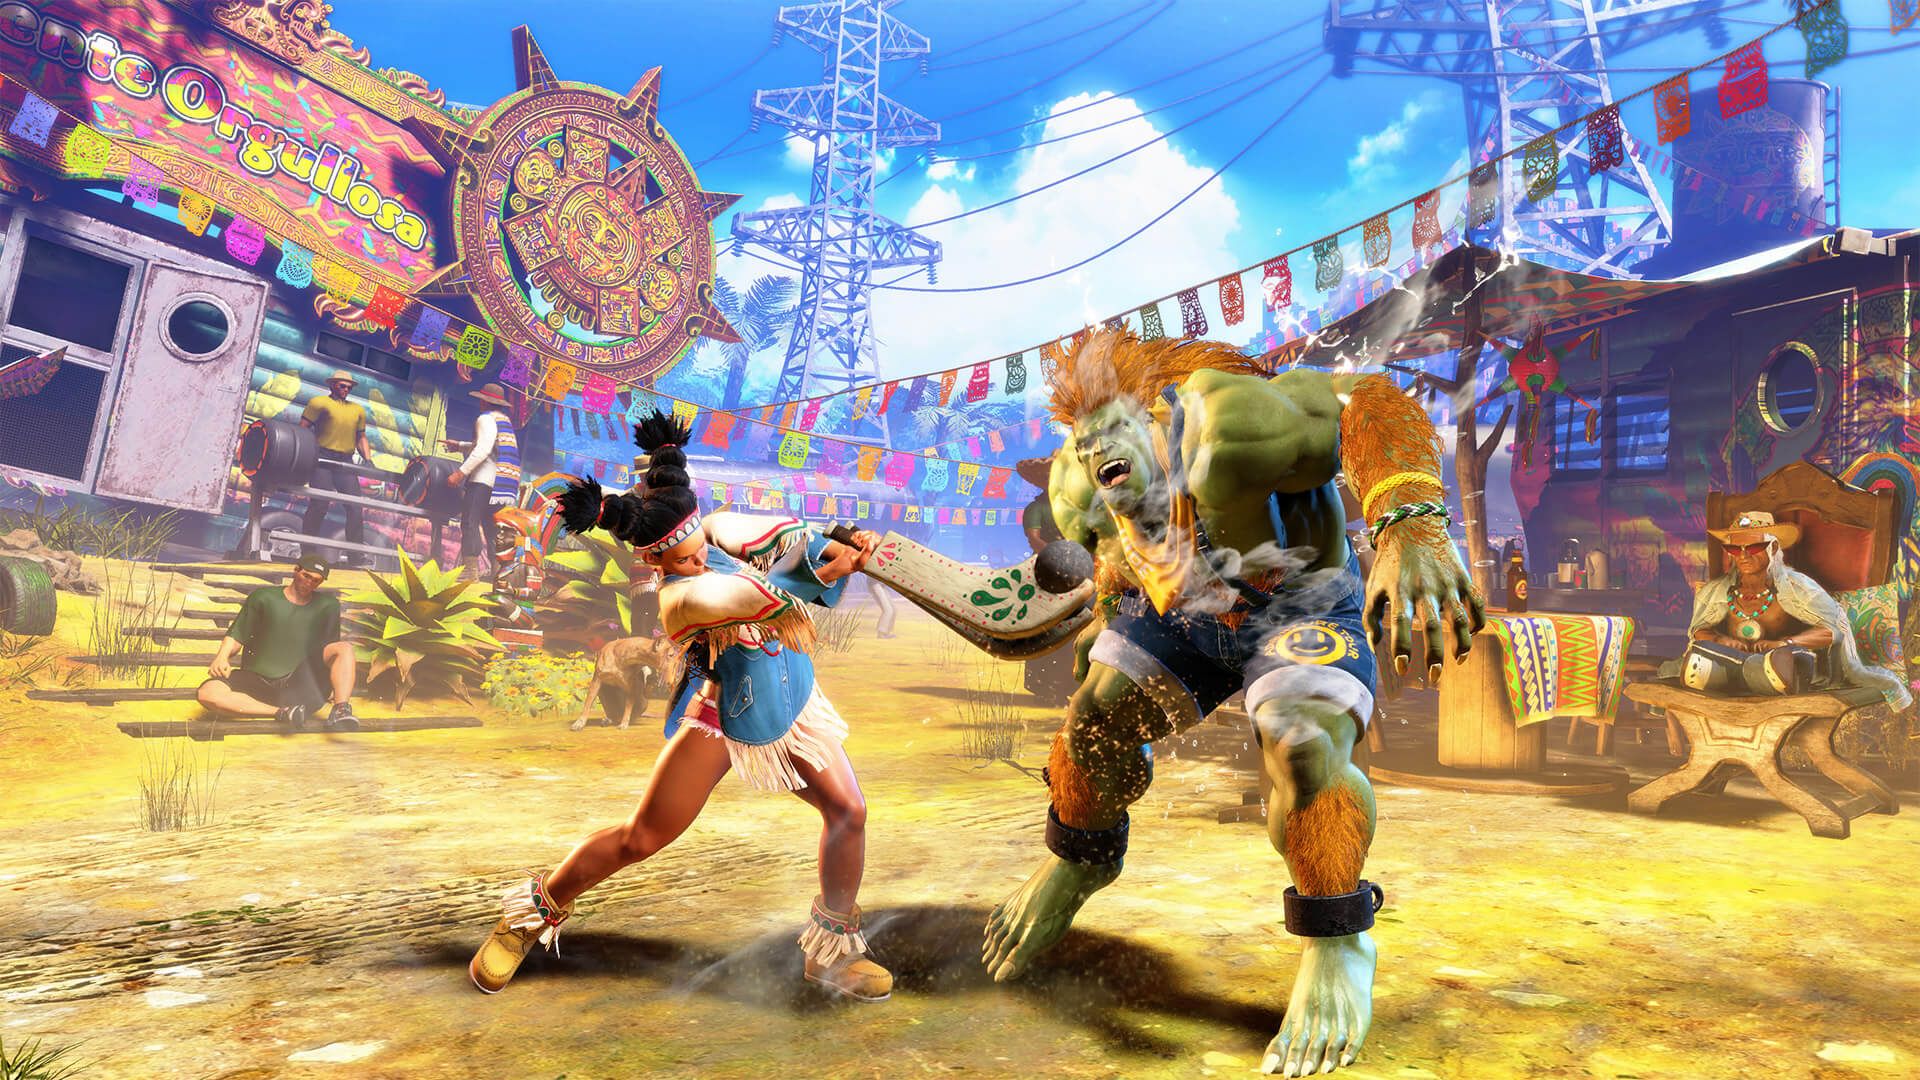 Street Fighter 6' Revamps Iconic Video Game to Make it Easier for